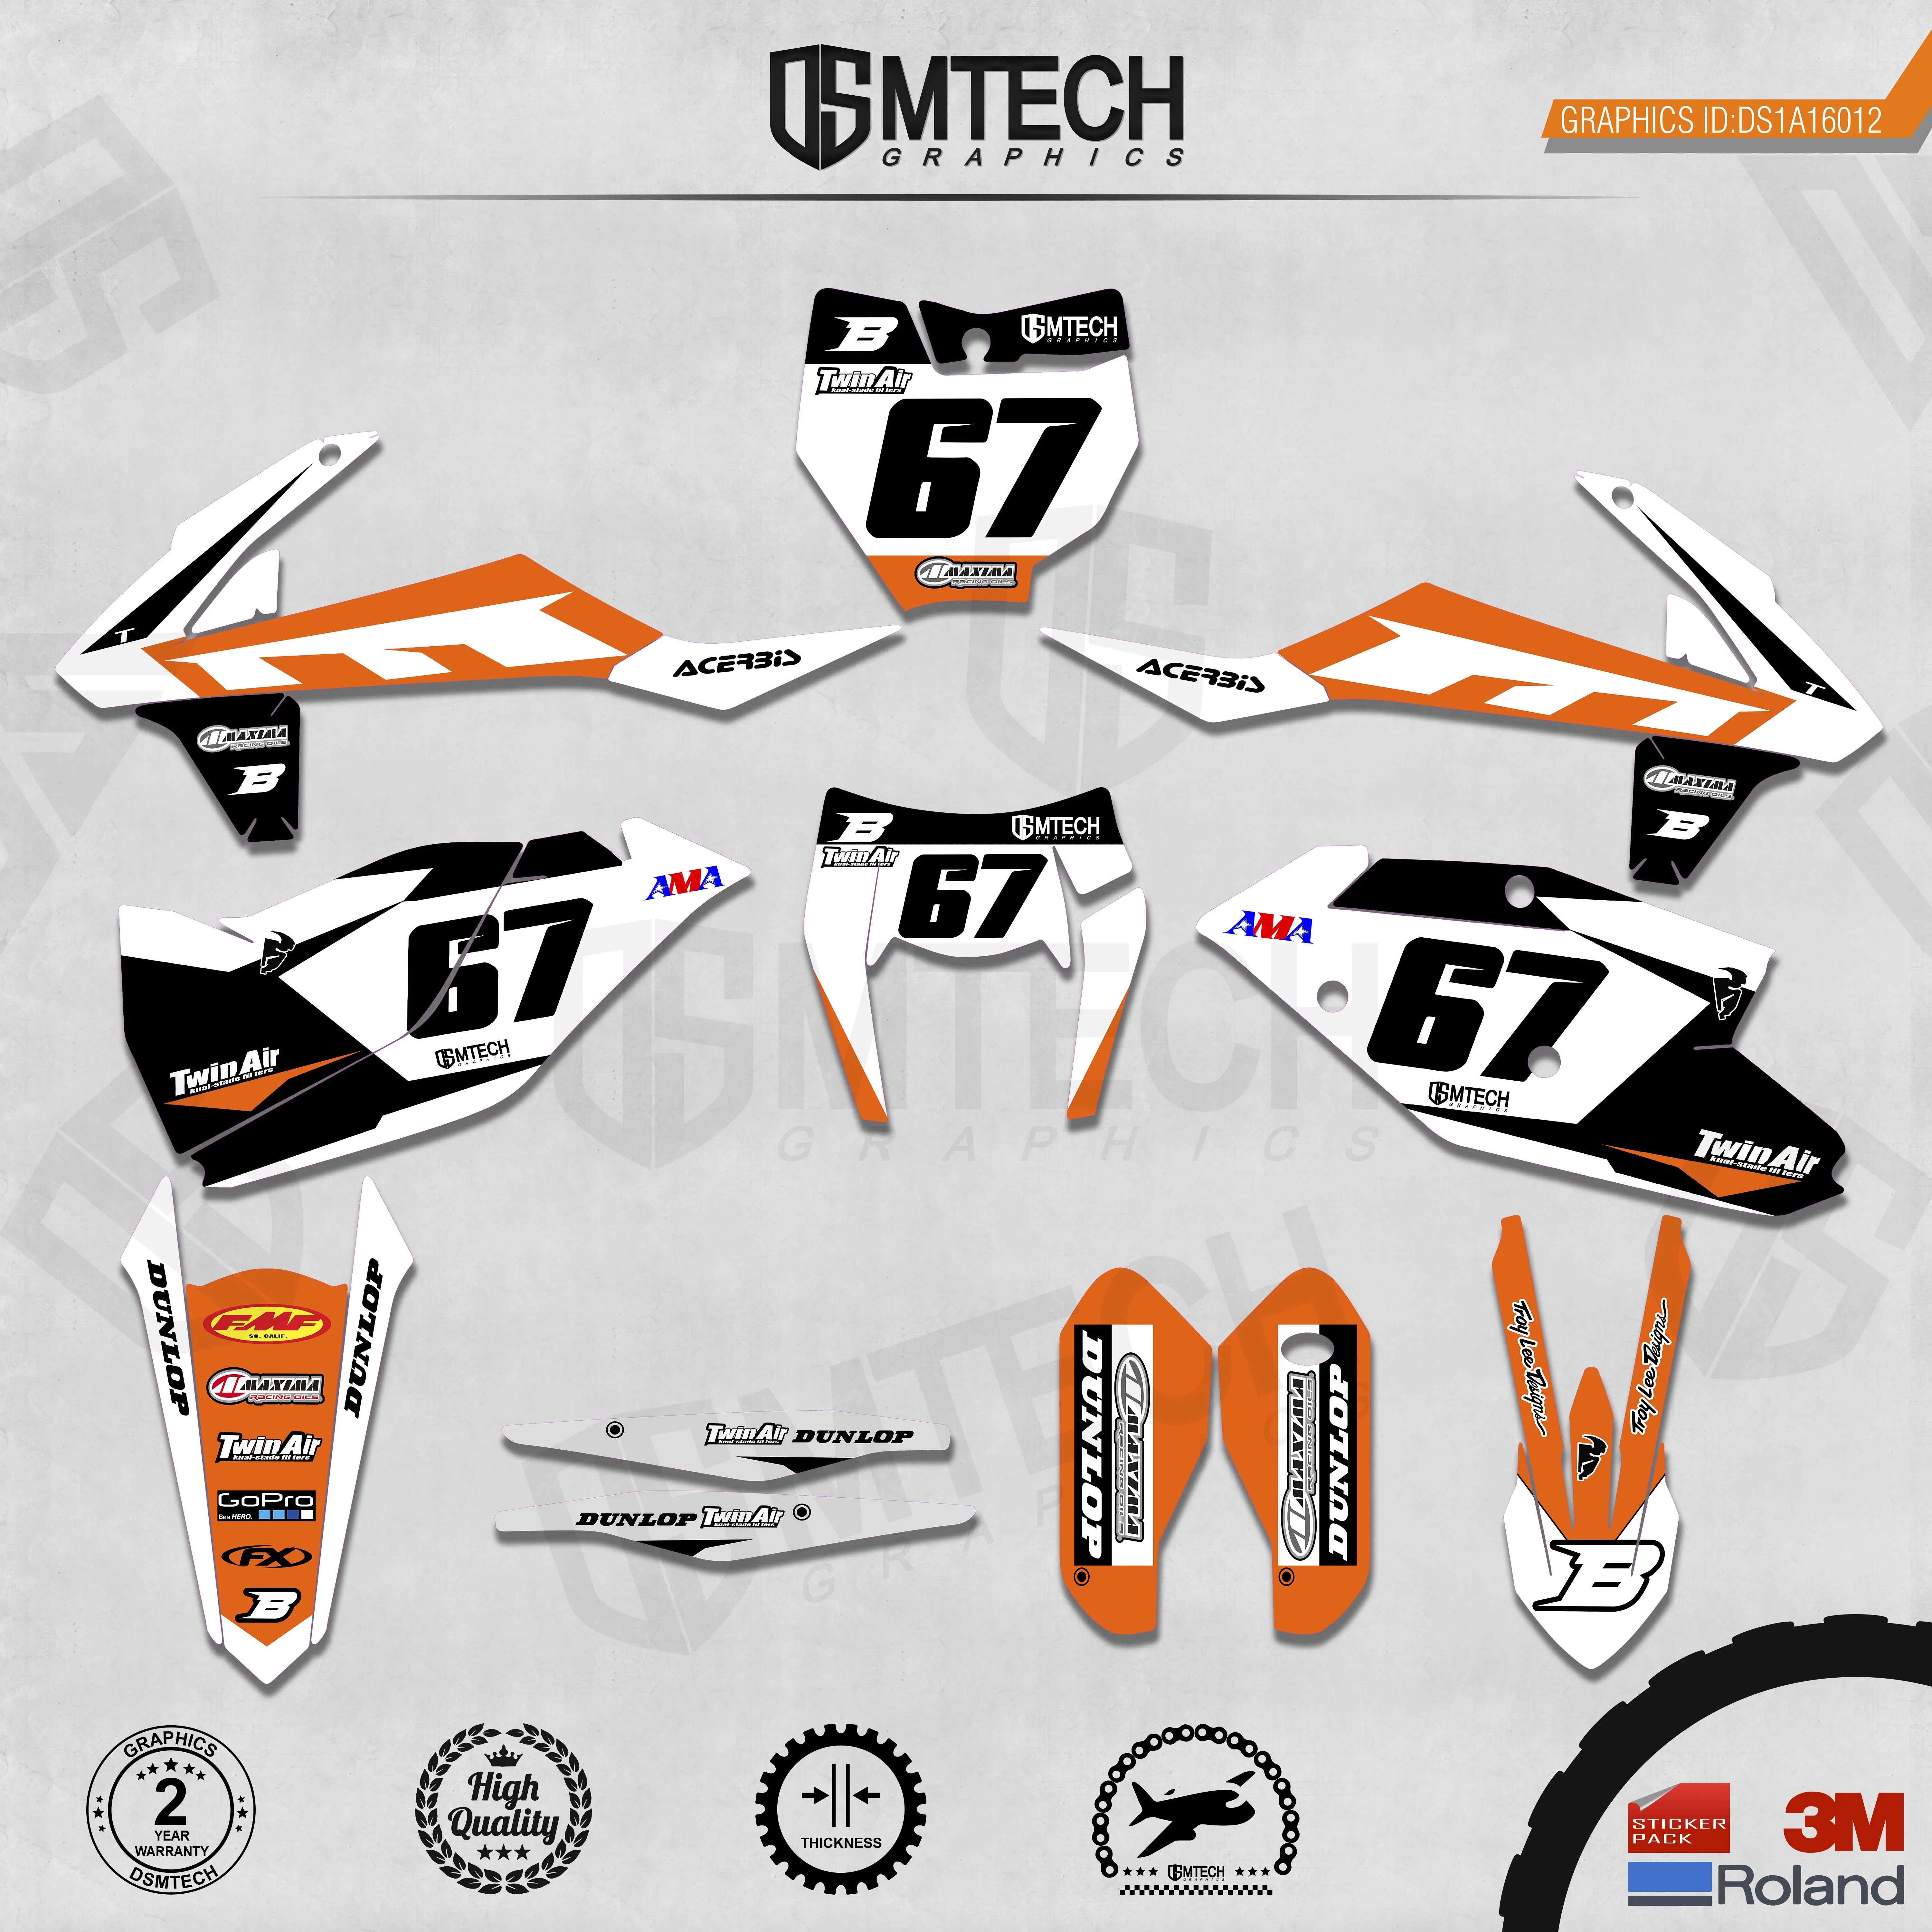 DSMTECH Customized Team Graphics Backgrounds Decals 3M Custom Stickers For KTM 2017-2019 EXC 2016-2018 SXF  012